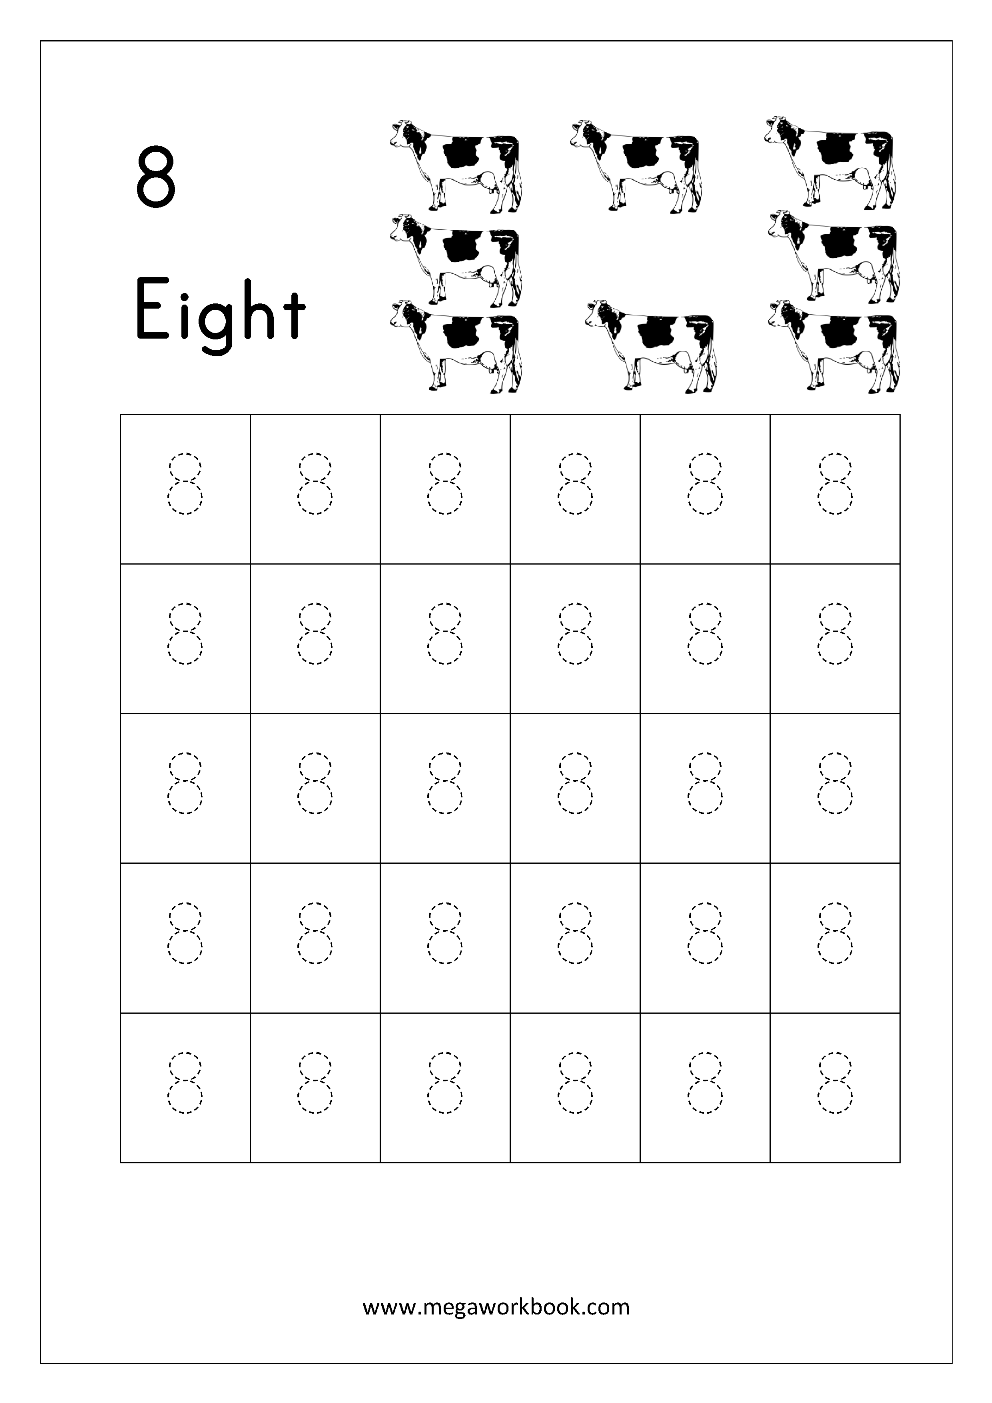 numbers-1-100-tracing-worksheets-by-teach-at-daycare-tpt-missing